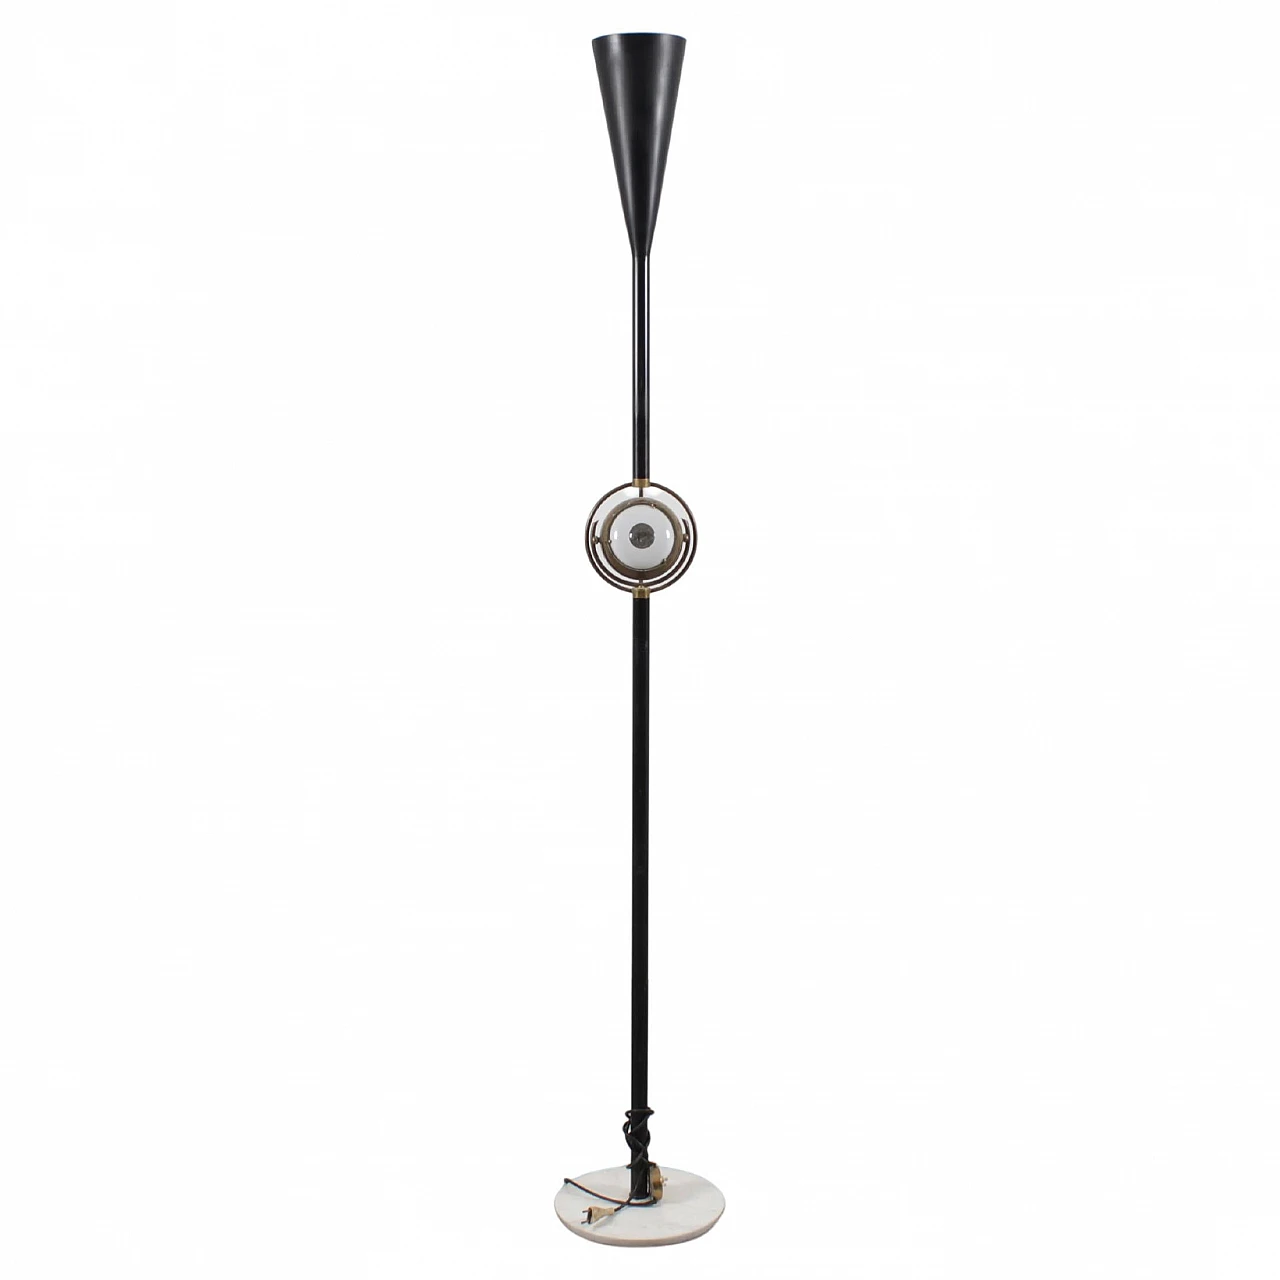 12555 Polifemo floor lamp by A. Lelii for Arredoluce, 1956 1